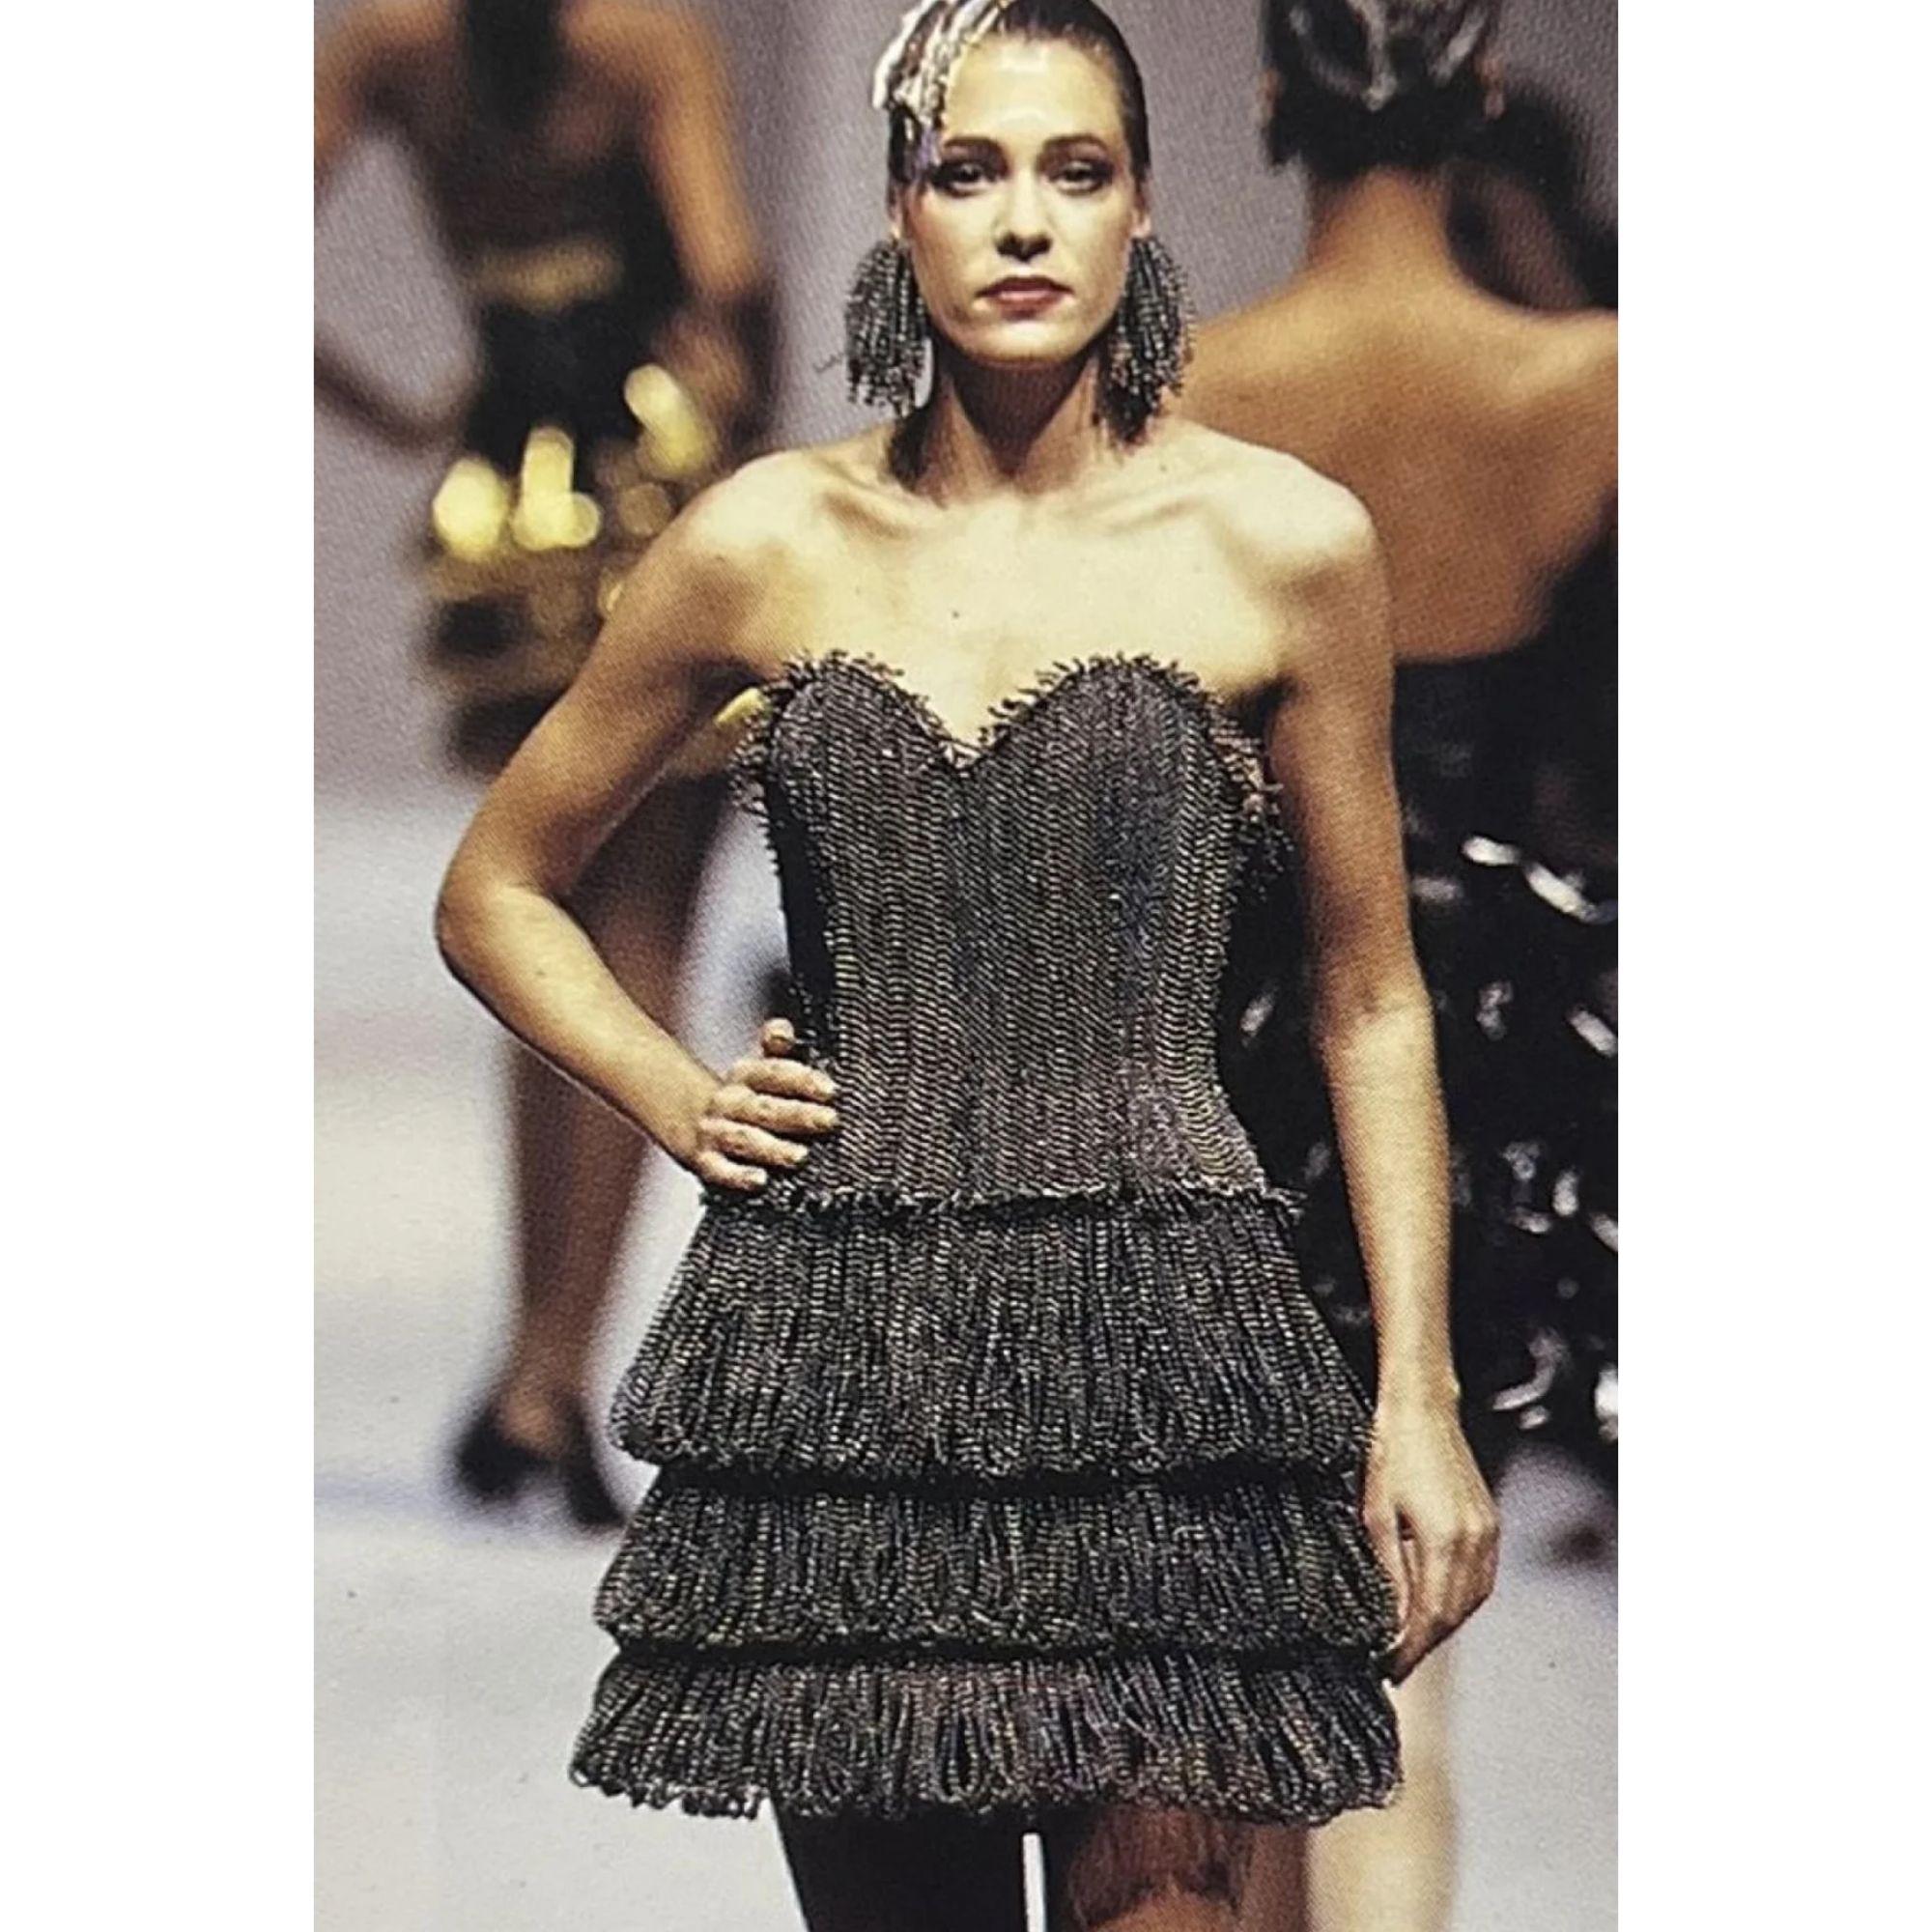 S/S 1988 Paco Rabanne Haute Couture iridescent beaded bustier, skirt, and earring set. Structured strapless bustier featuring beaded 'fringe' at bust and hem ties in back with silk satin bow. Pairs perfectly with three-tiered beaded mini skirt with